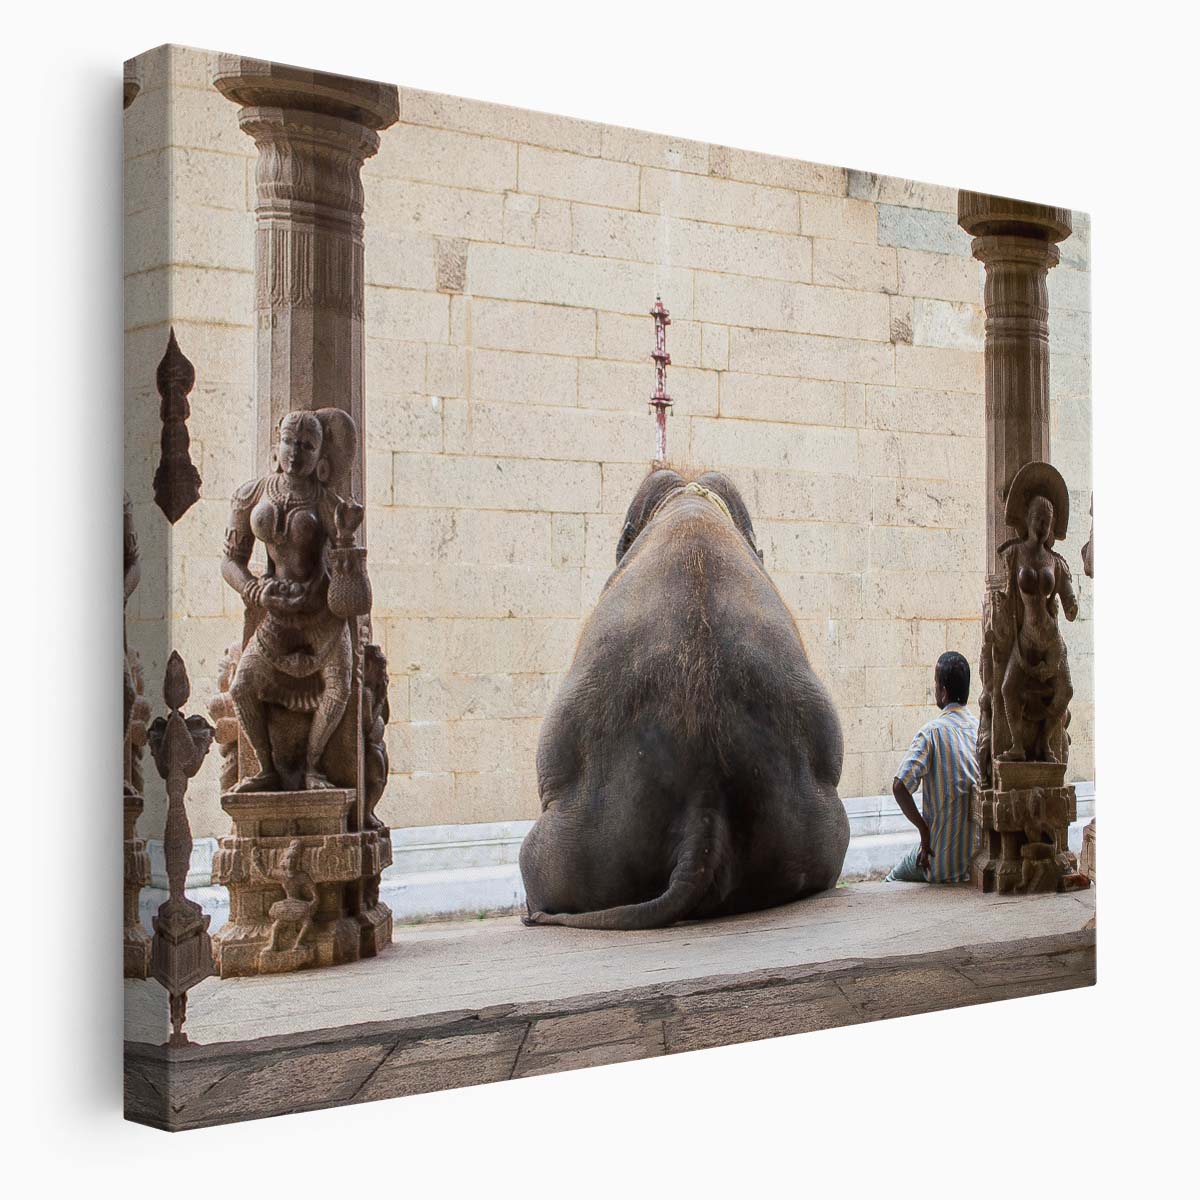 Sacred Elephant Temple Zen Meditation Wall Art by Luxuriance Designs. Made in USA.